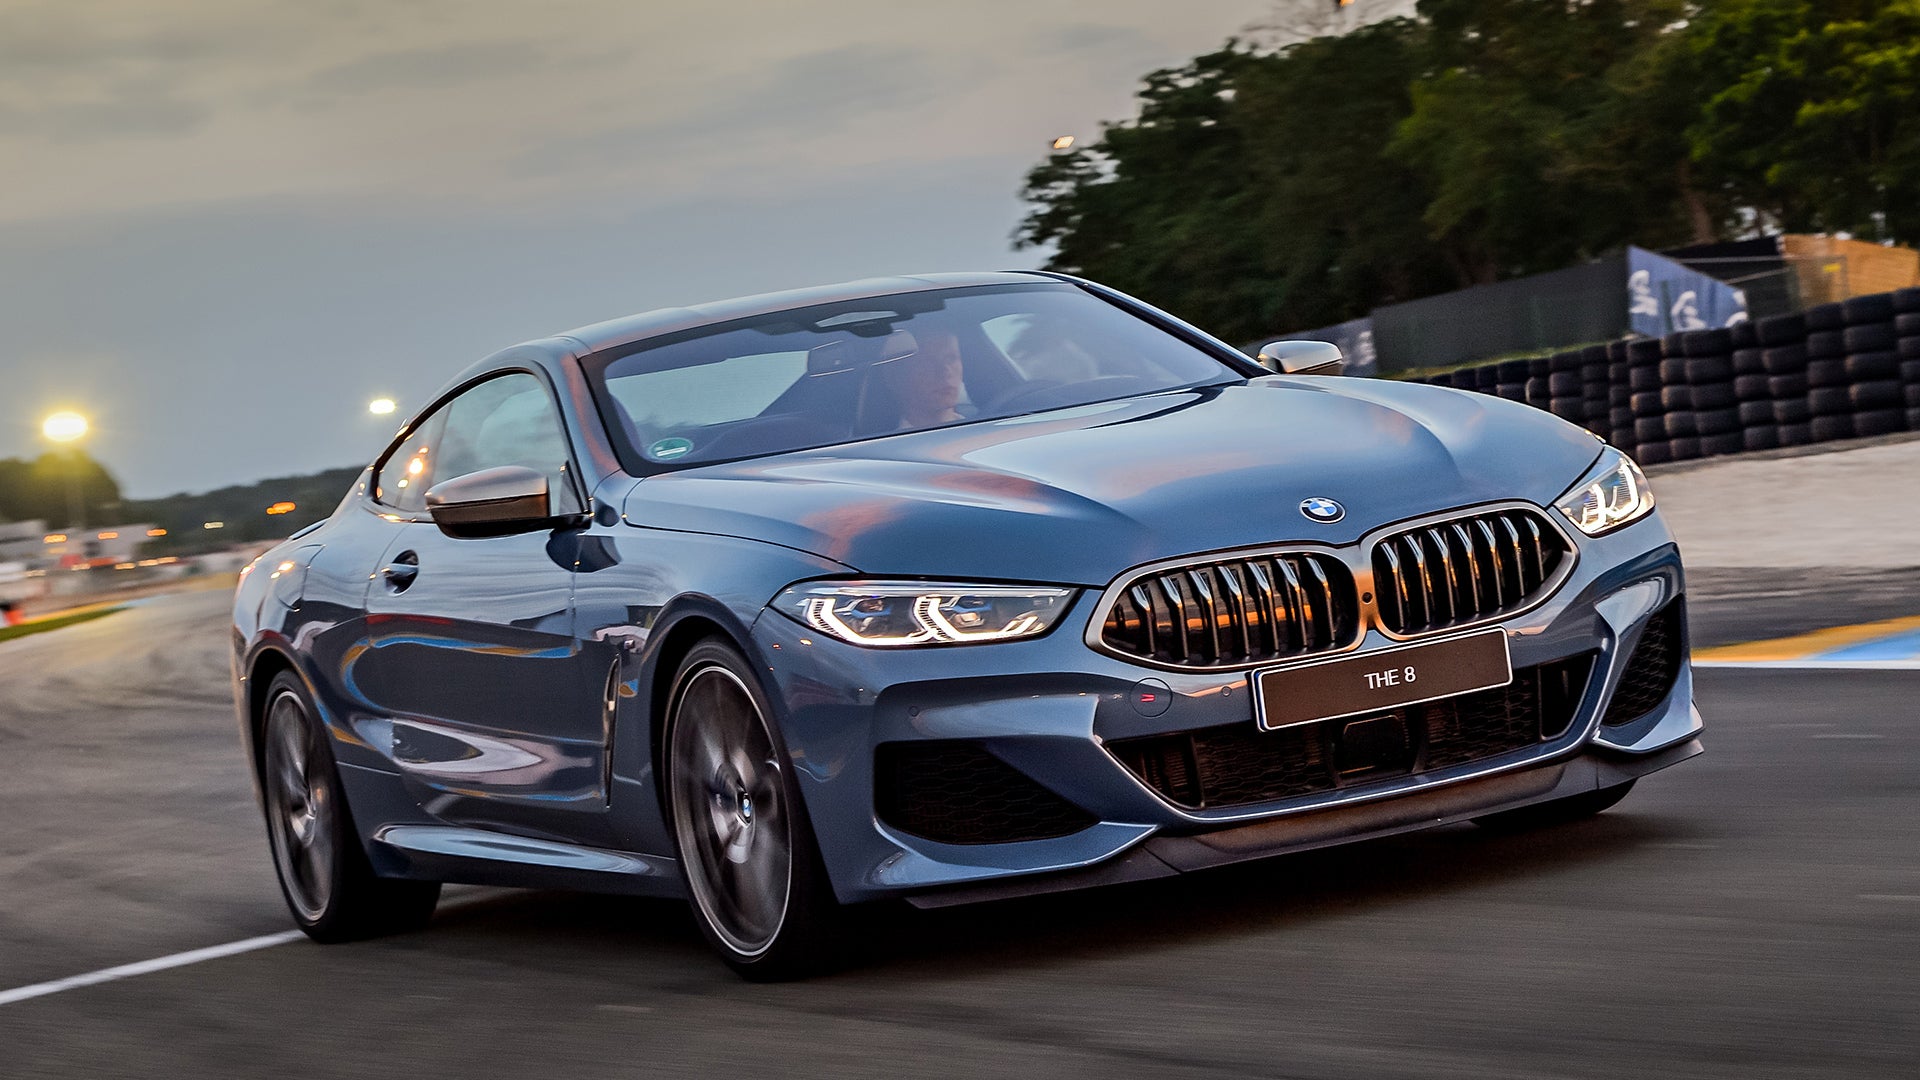 2019 BMW M850i xDrive Review: As the Brand’s New Halo Car, This Sexy GT Does Right By Bimmer